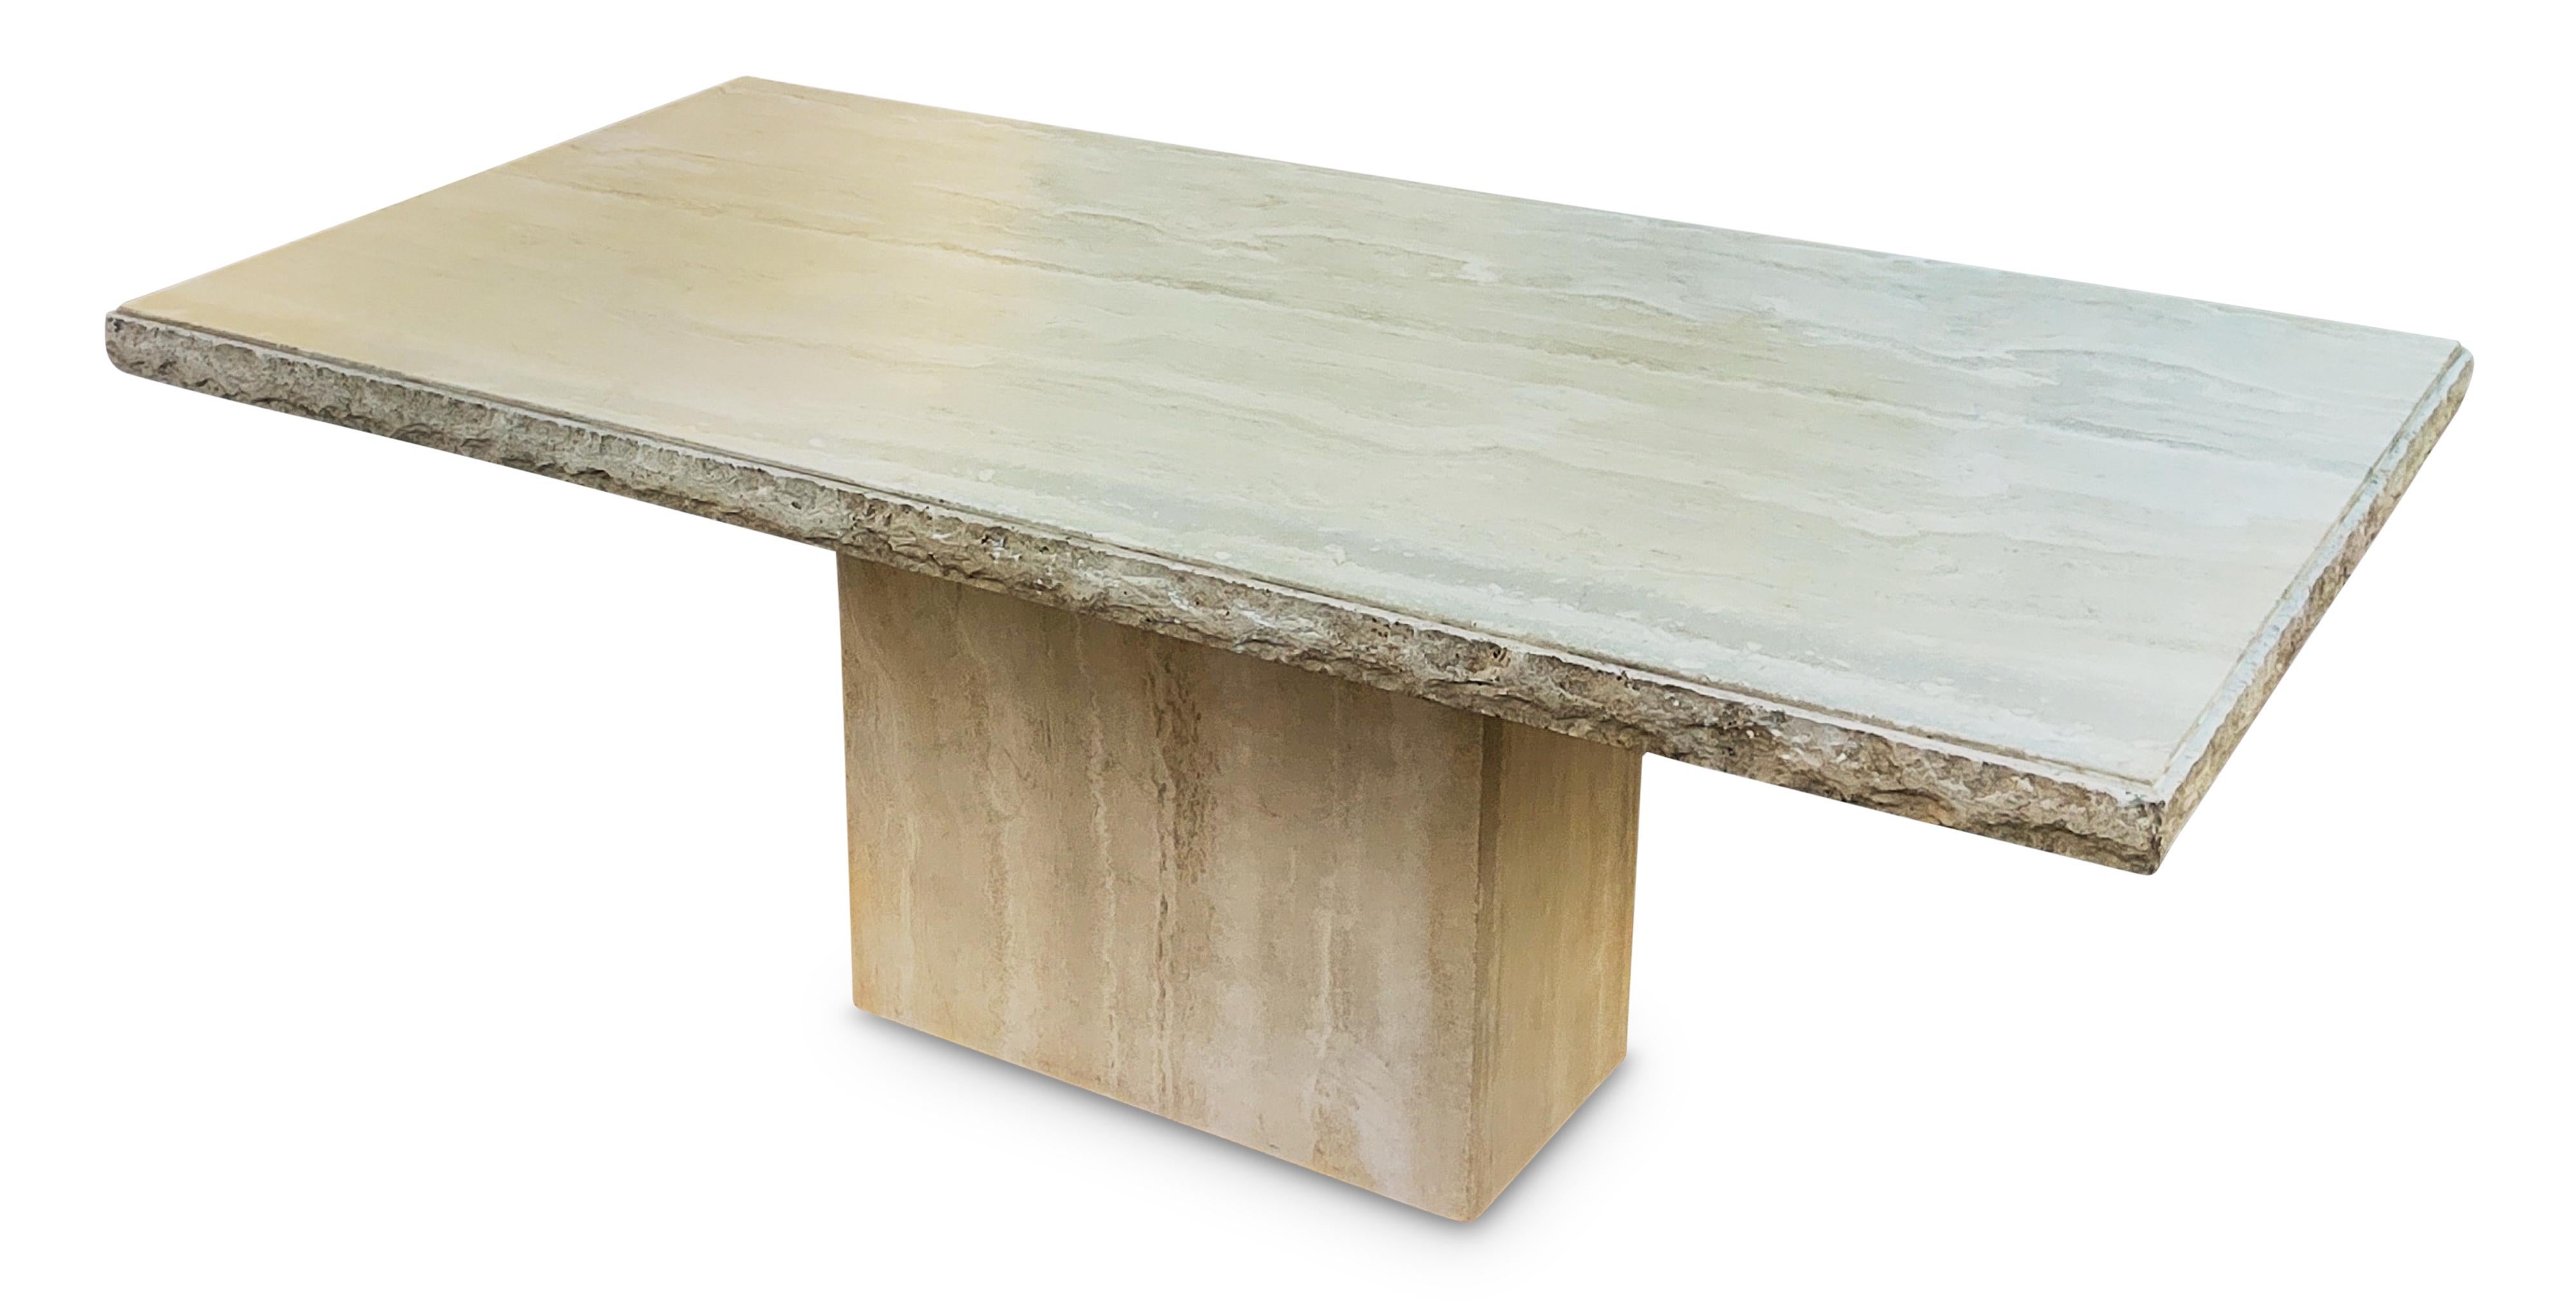 Made in Italy in the 1970s, a large dining table or desk made entirely of travertine marble. The top is a large single slab of polished travertine, with a warm and pleasing natural grain. The smoothness of the top is attractively contrasted with a